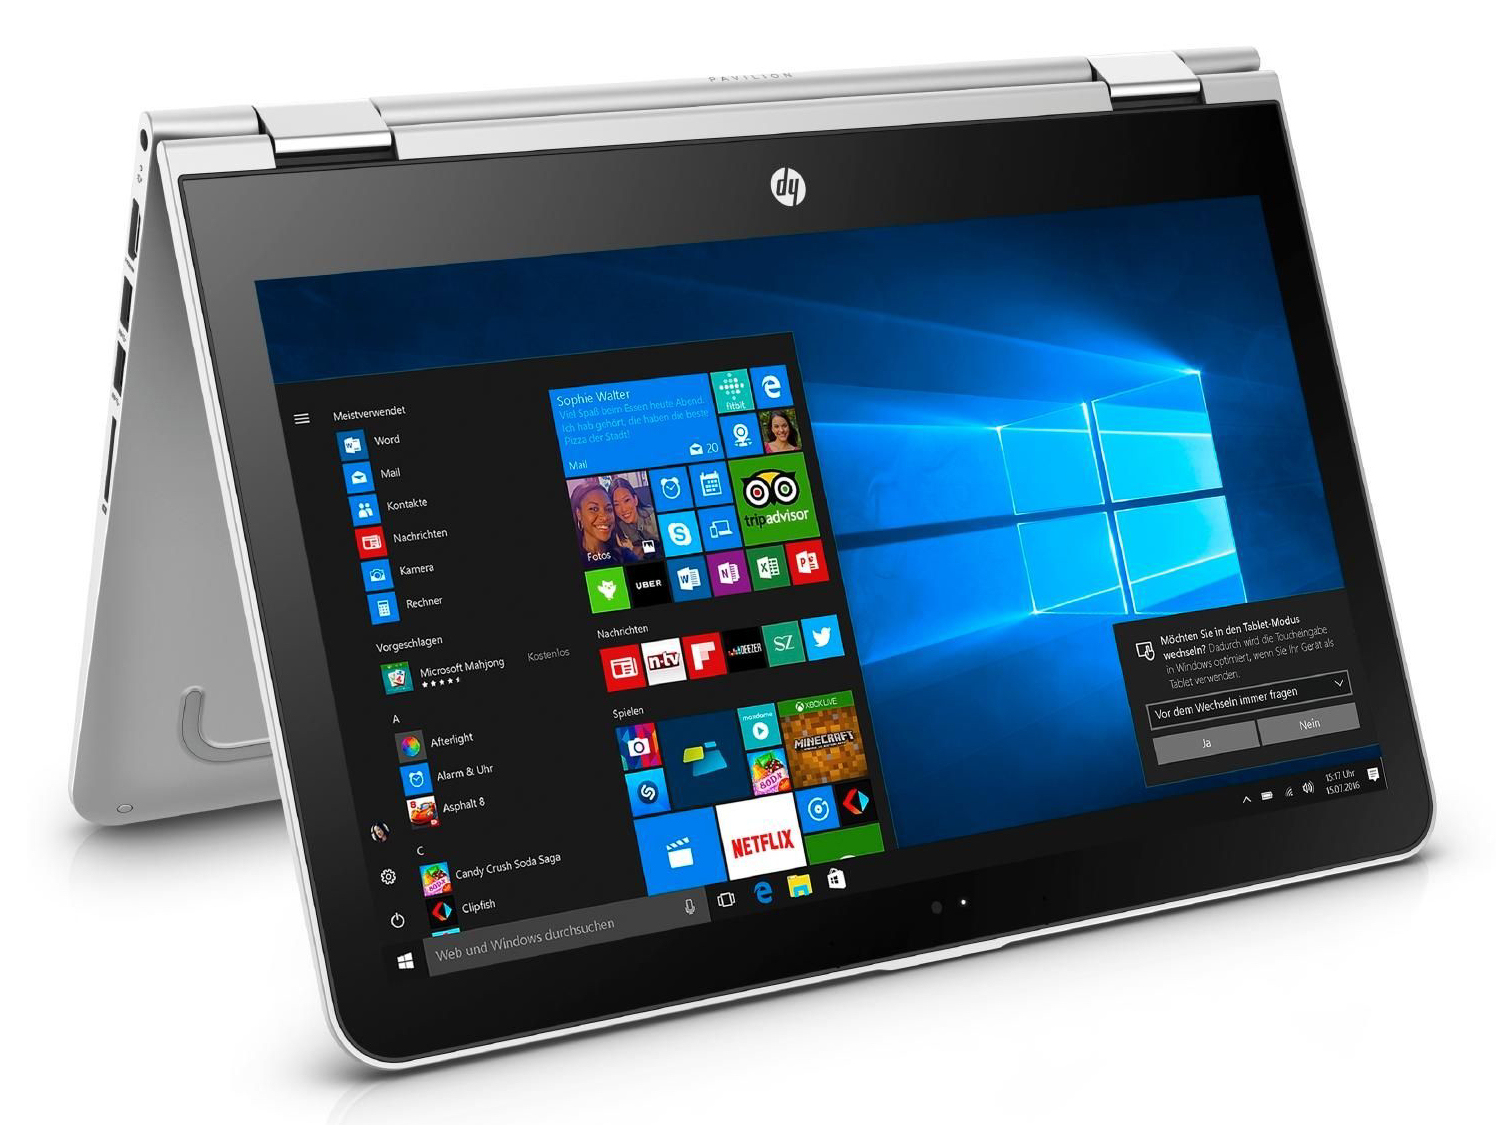 HP Pavilion x360 specifications